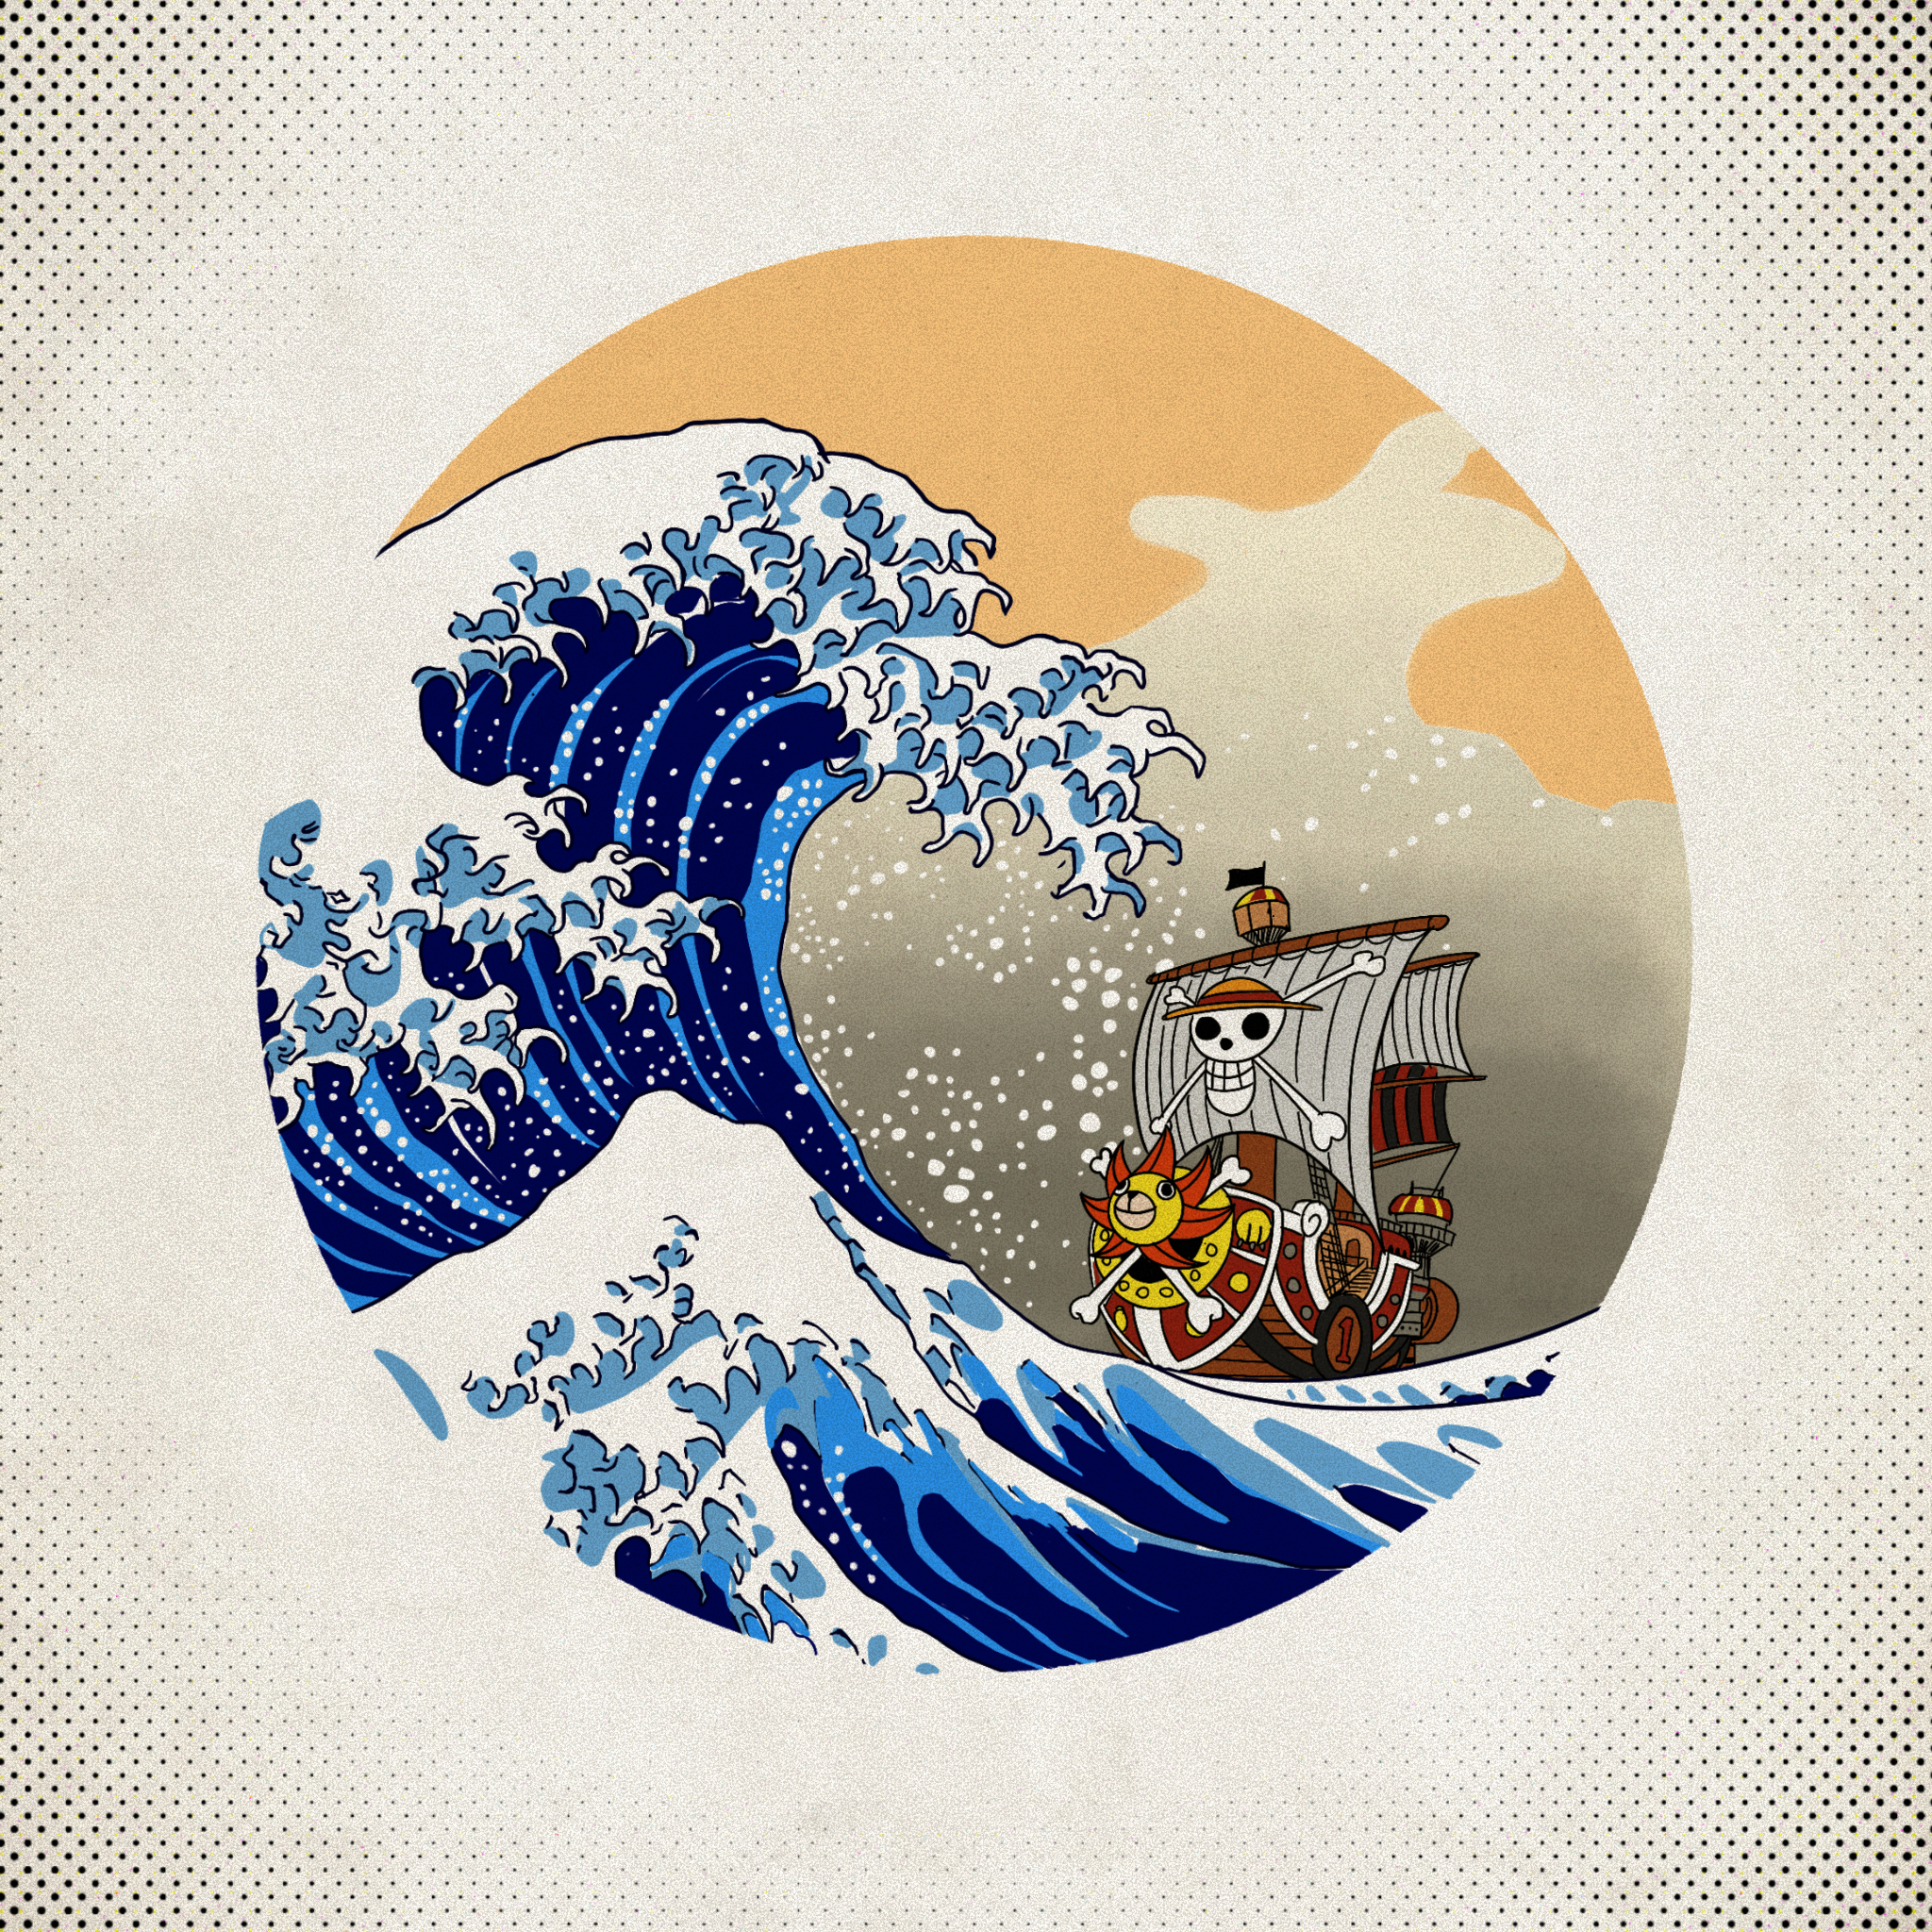 Buy Great Wave Tattoo Online In India - Etsy India